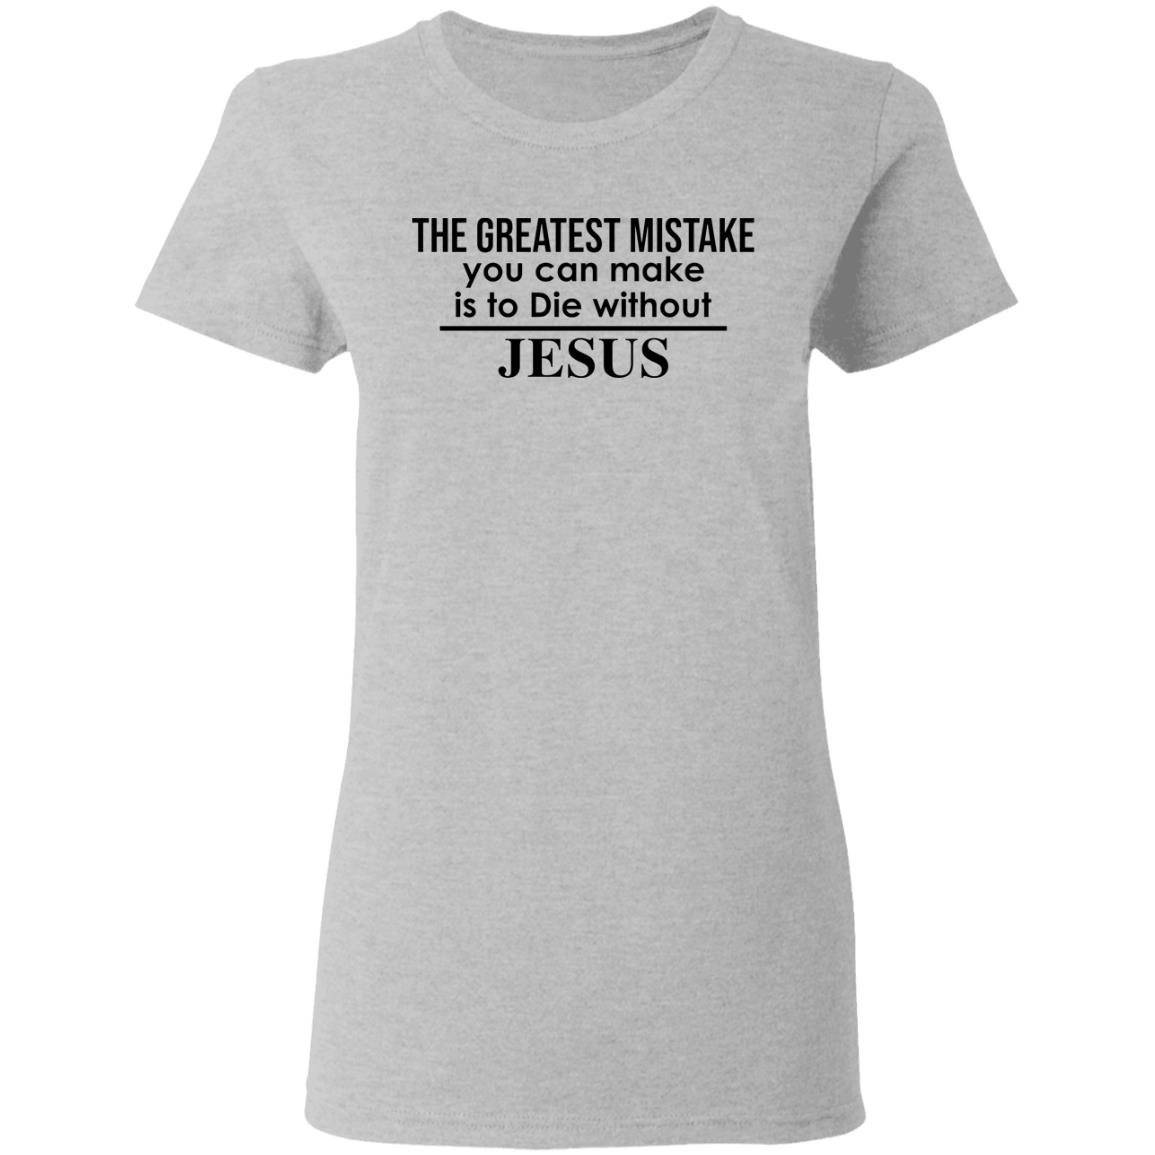 The greatest mistake you can make is to die without Jesus shirt - Rockatee